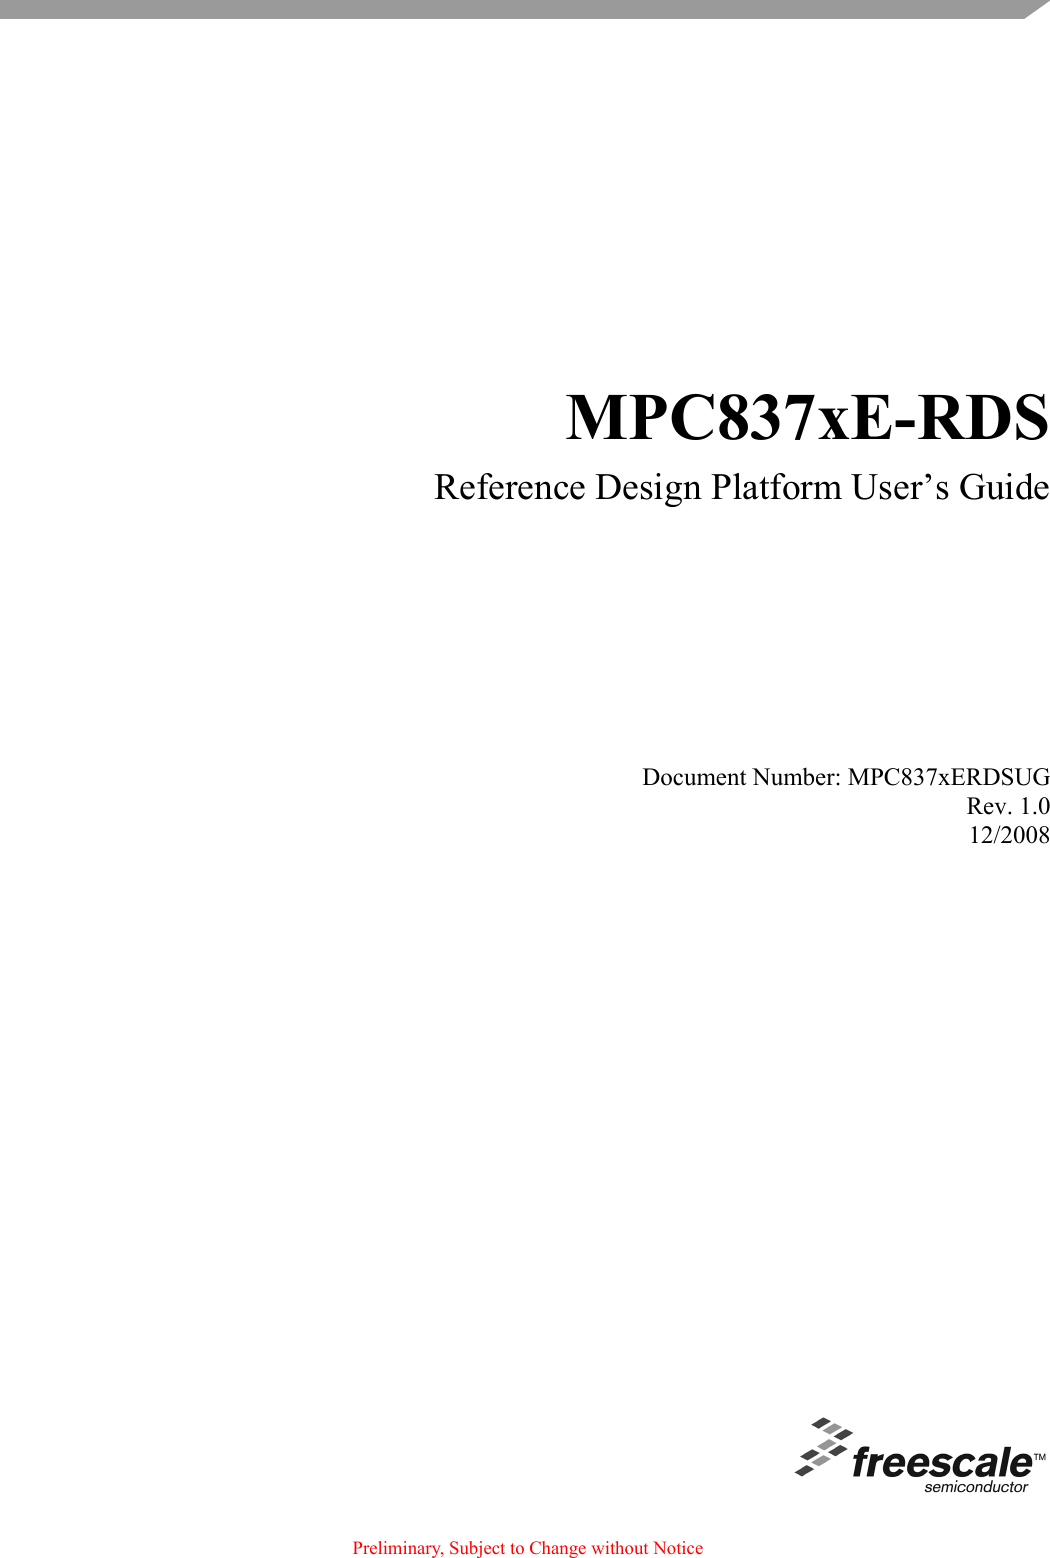 Document Number: MPC837xERDSUGRev. 1.012/2008 Preliminary, Subject to Change without NoticeMPC837xE-RDSReference Design Platform User’s Guide